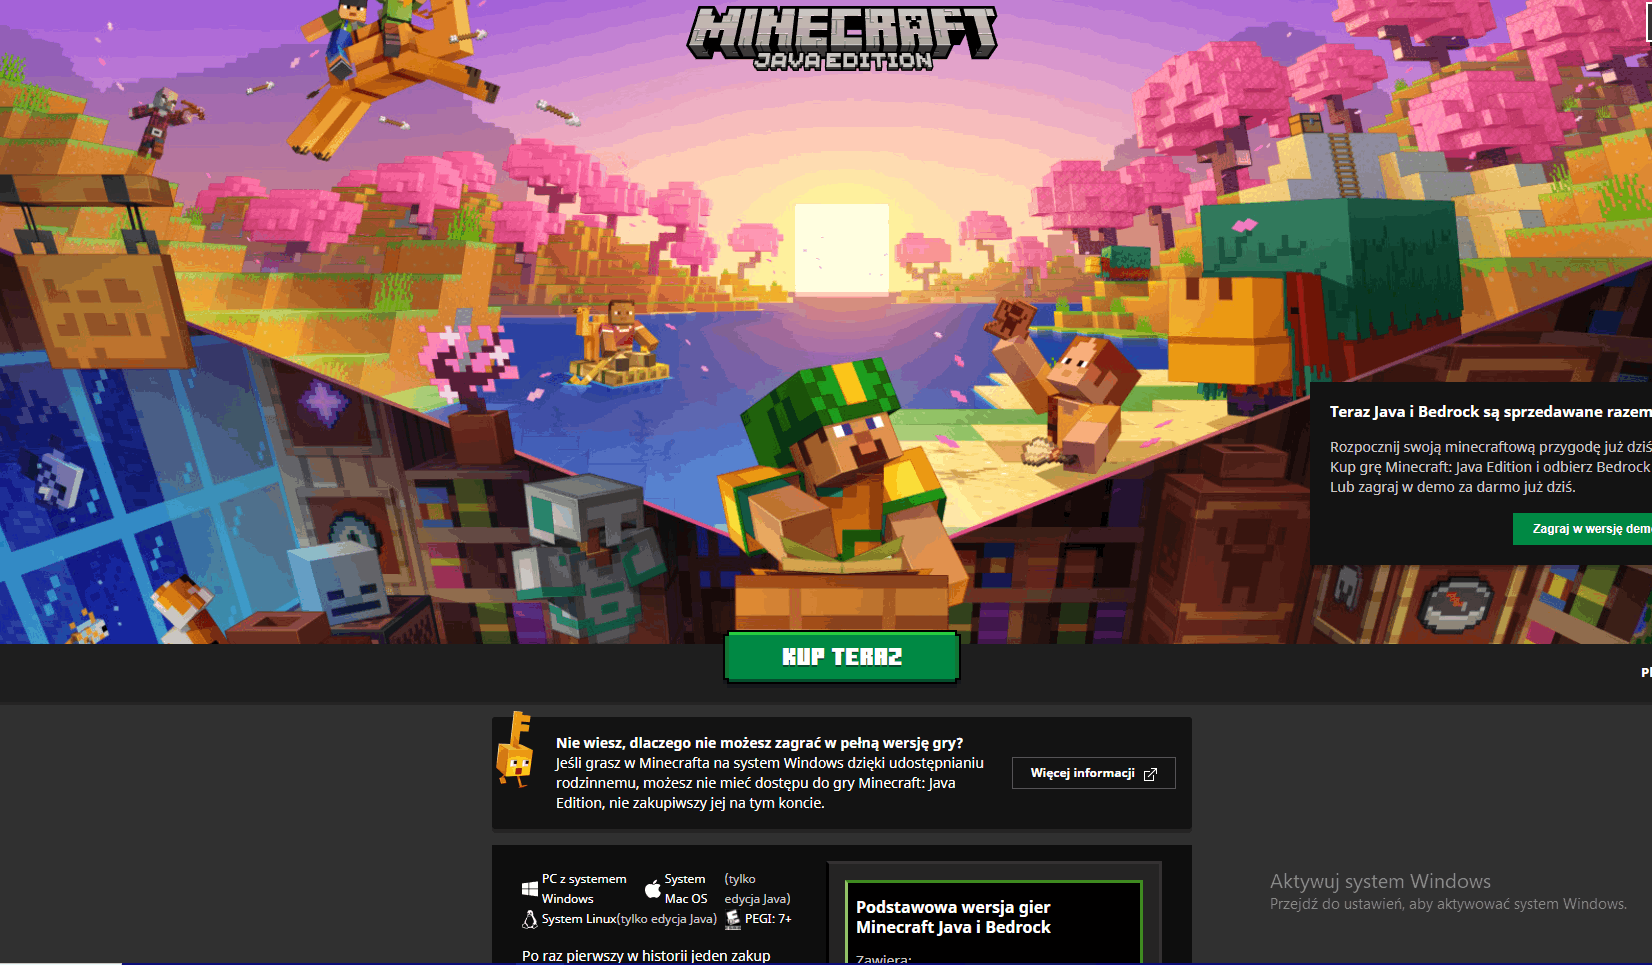 I can't claim minecraft Java Edition even tho I have Bedrock edition for Windows 10 [​IMG]